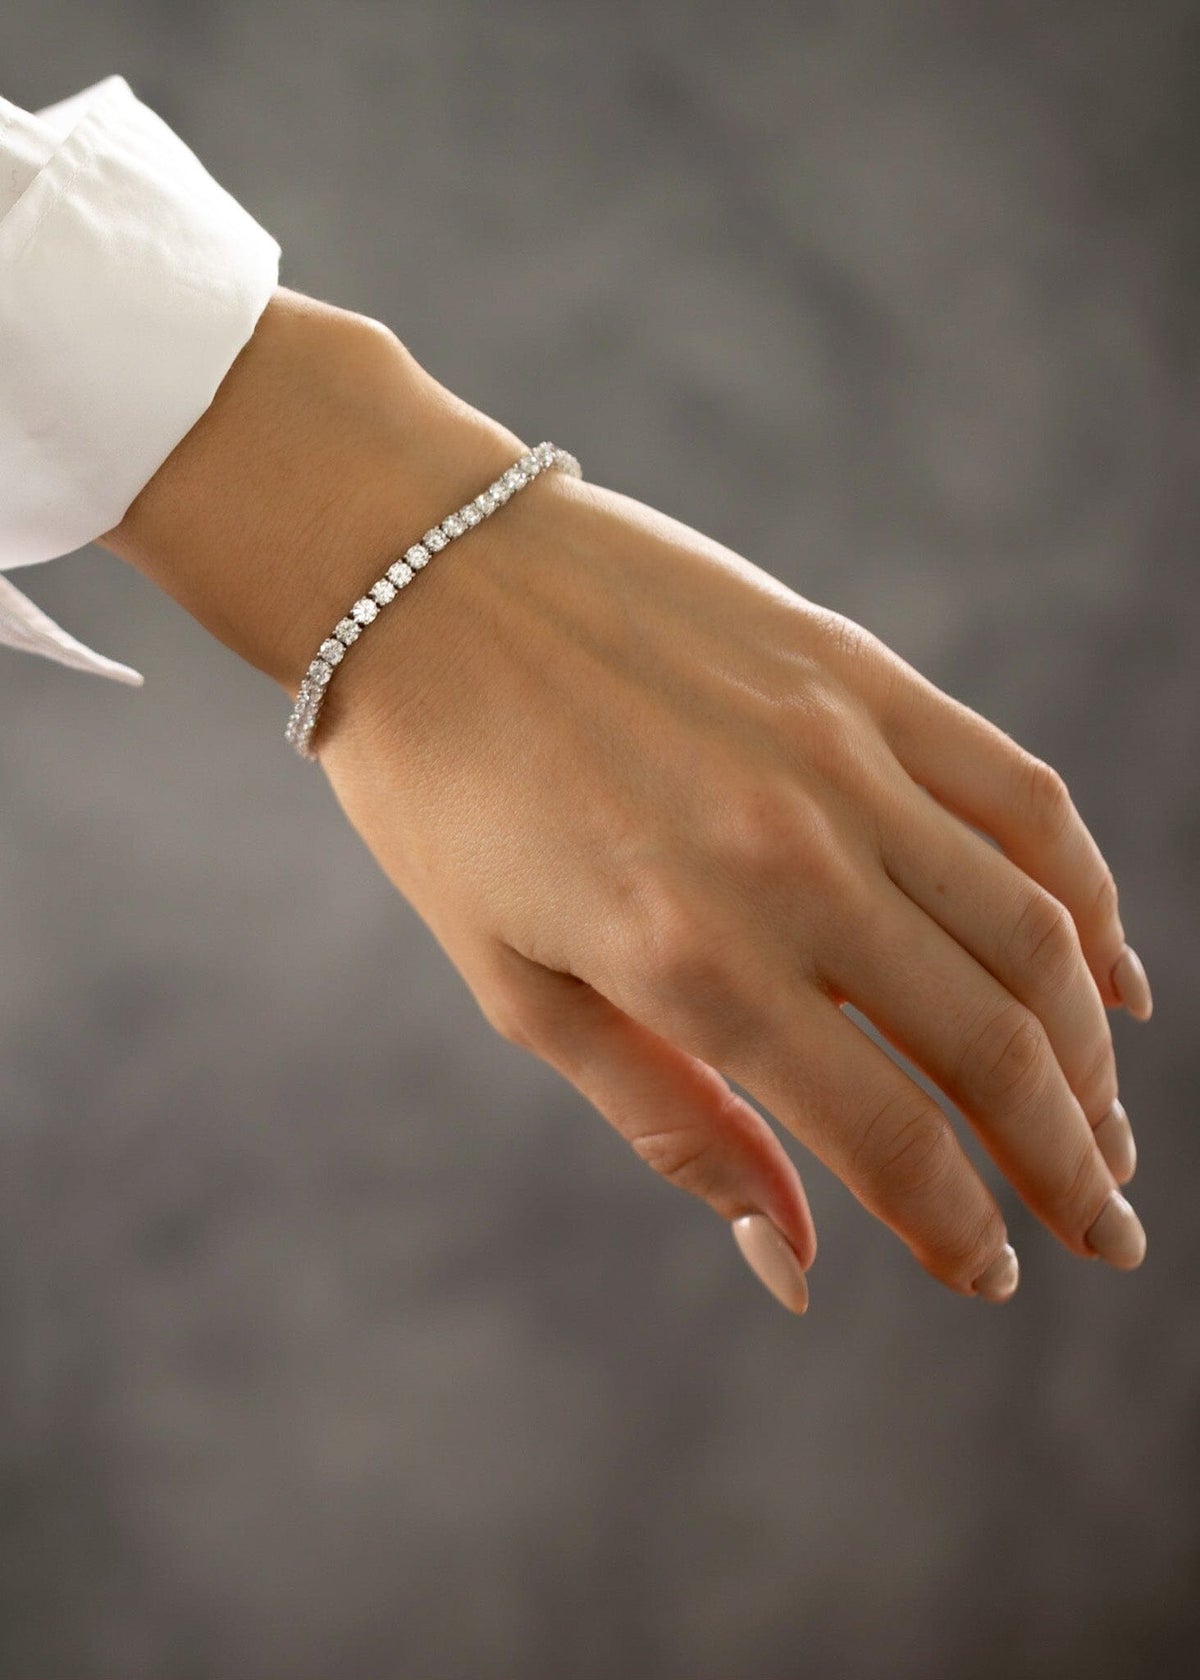 What is a tennis bracelet? And how much is it?